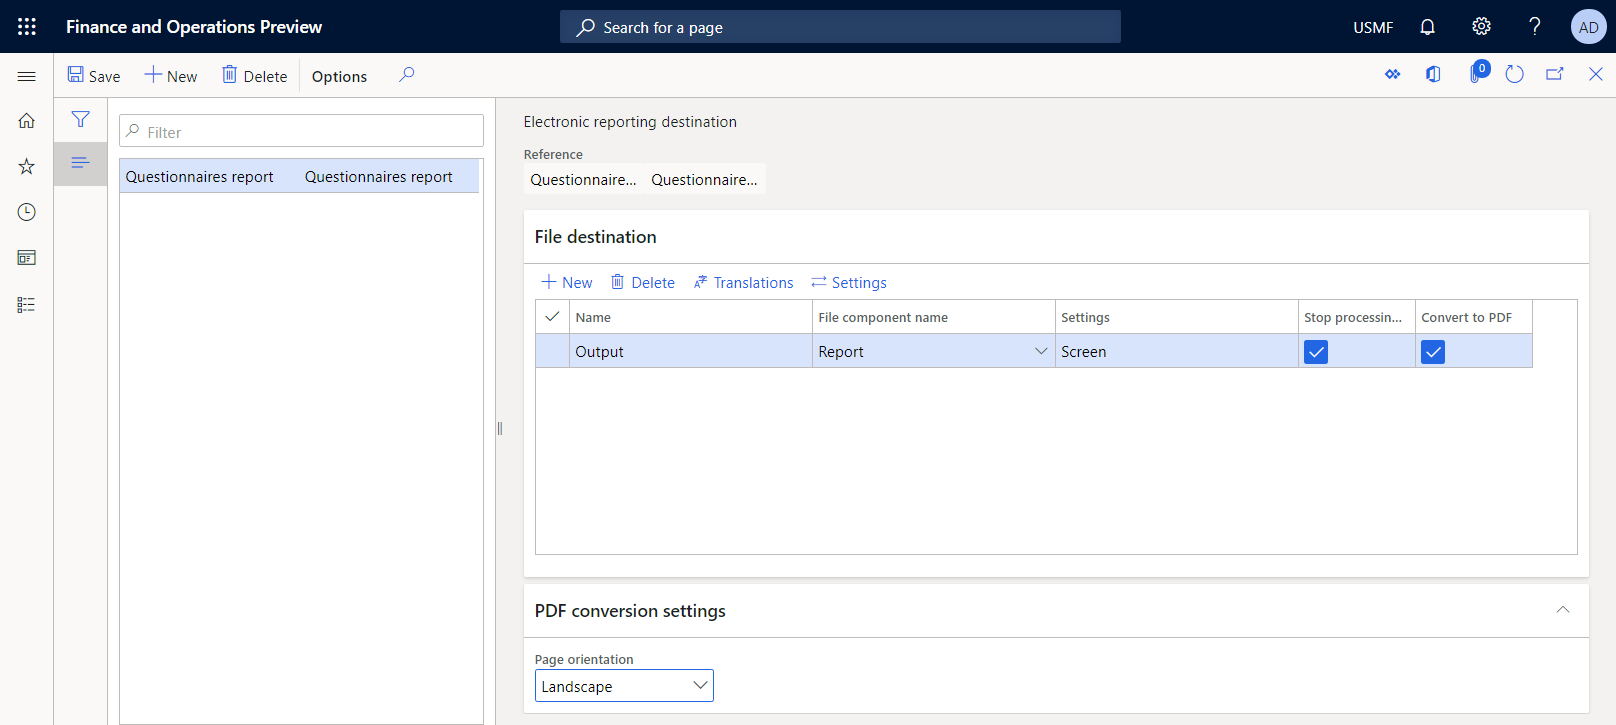 Configuring the custom Screen destination for the ER format on the Electronic reporting destination page.